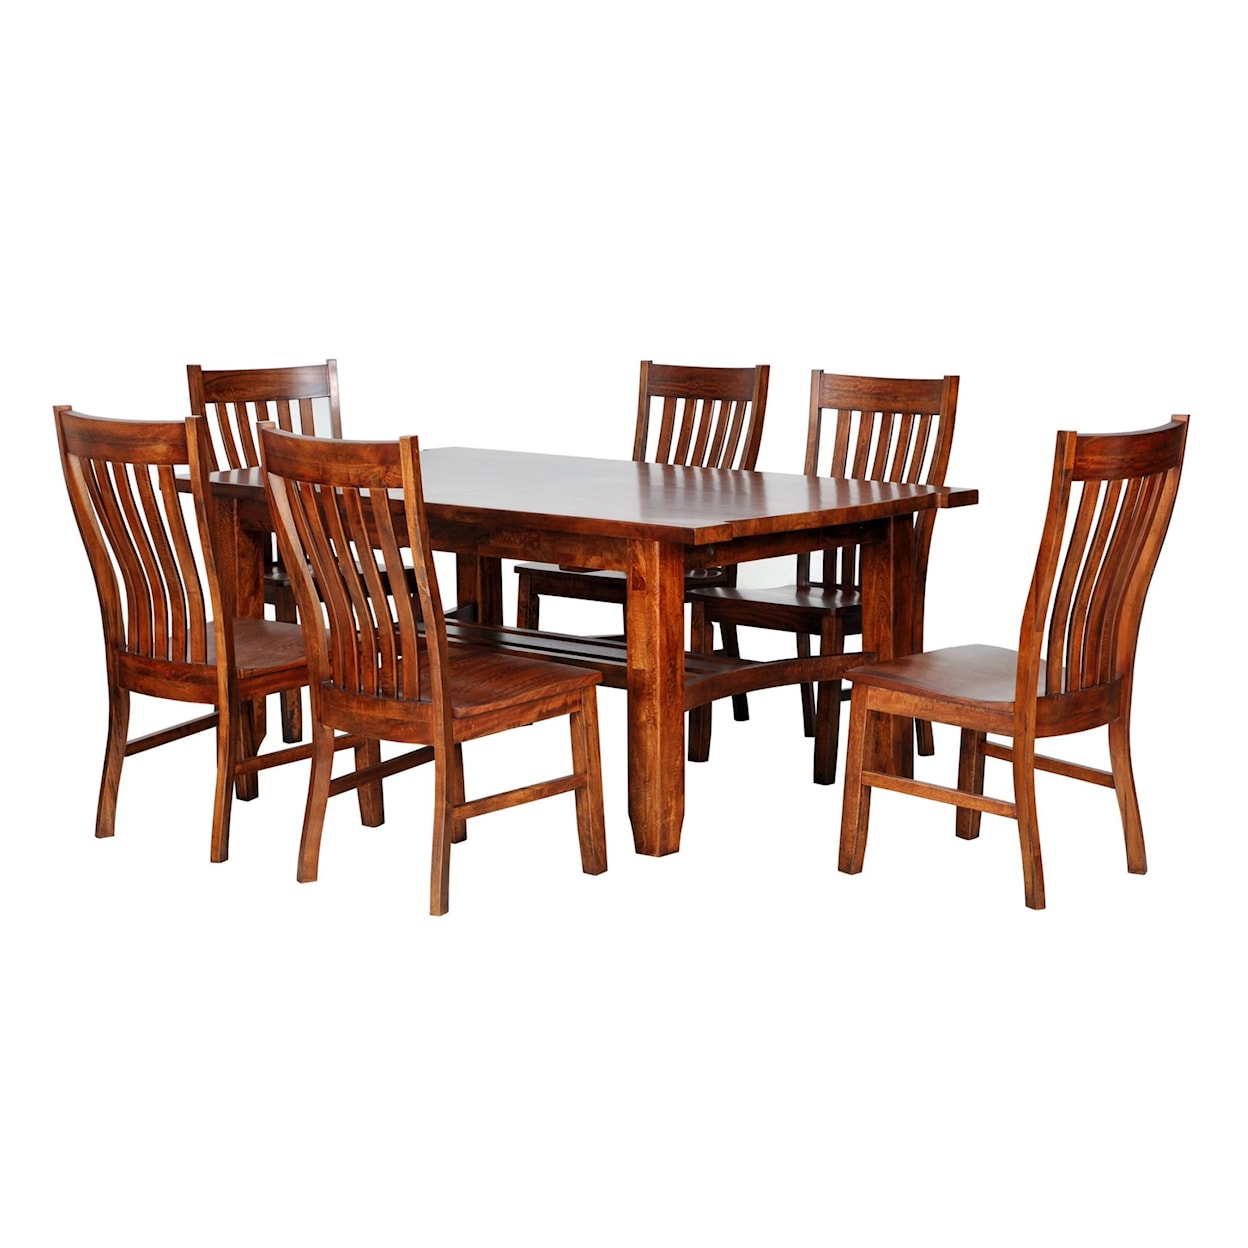 Virginia Furniture Market Solid Wood Whittier Side Chair